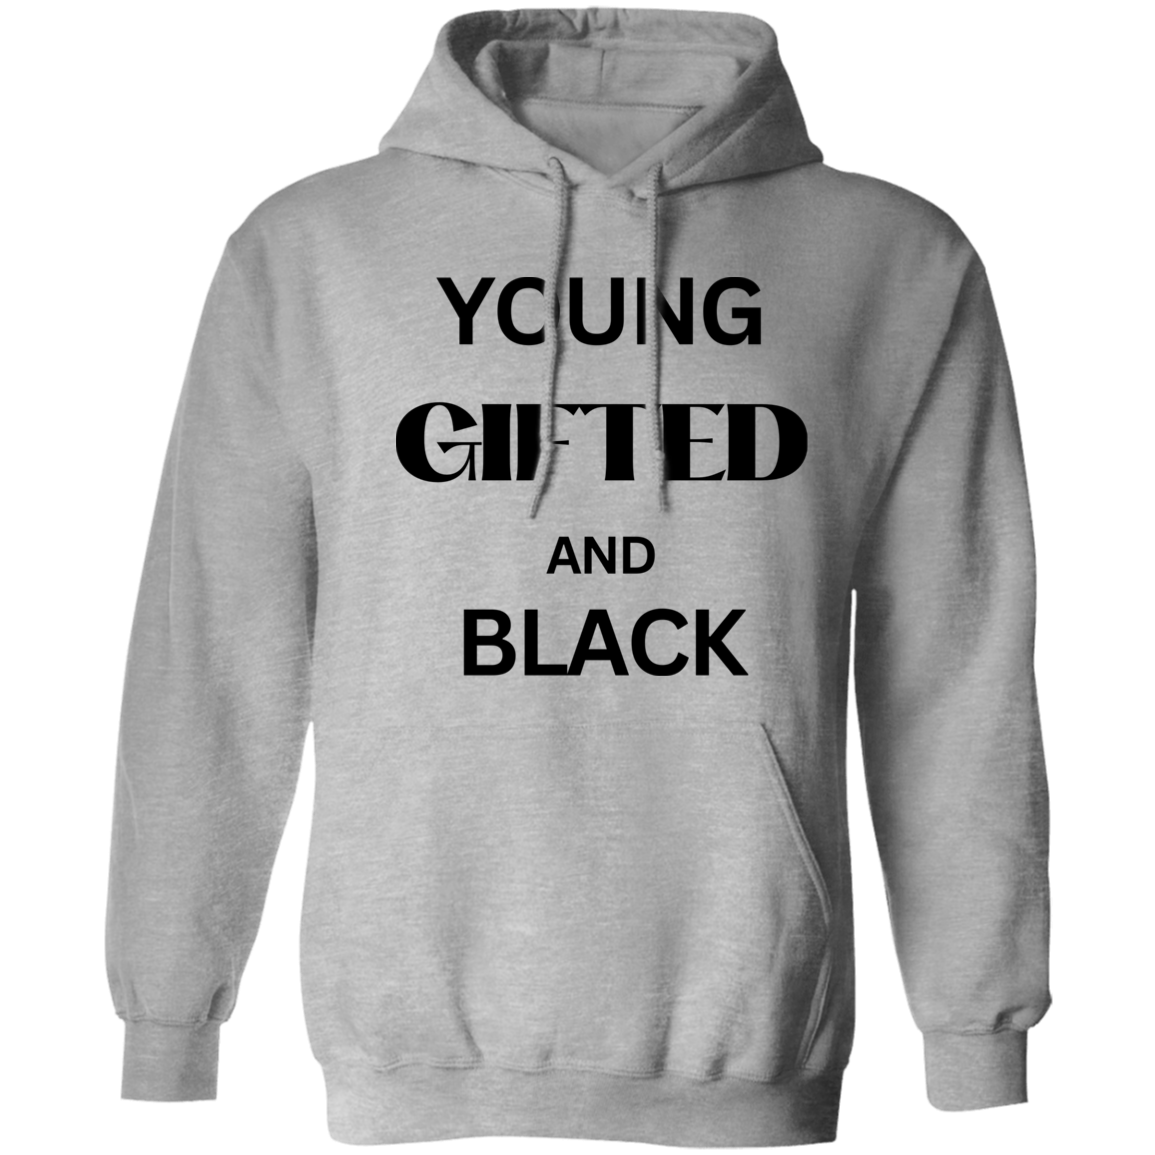 Young Gifted and Black